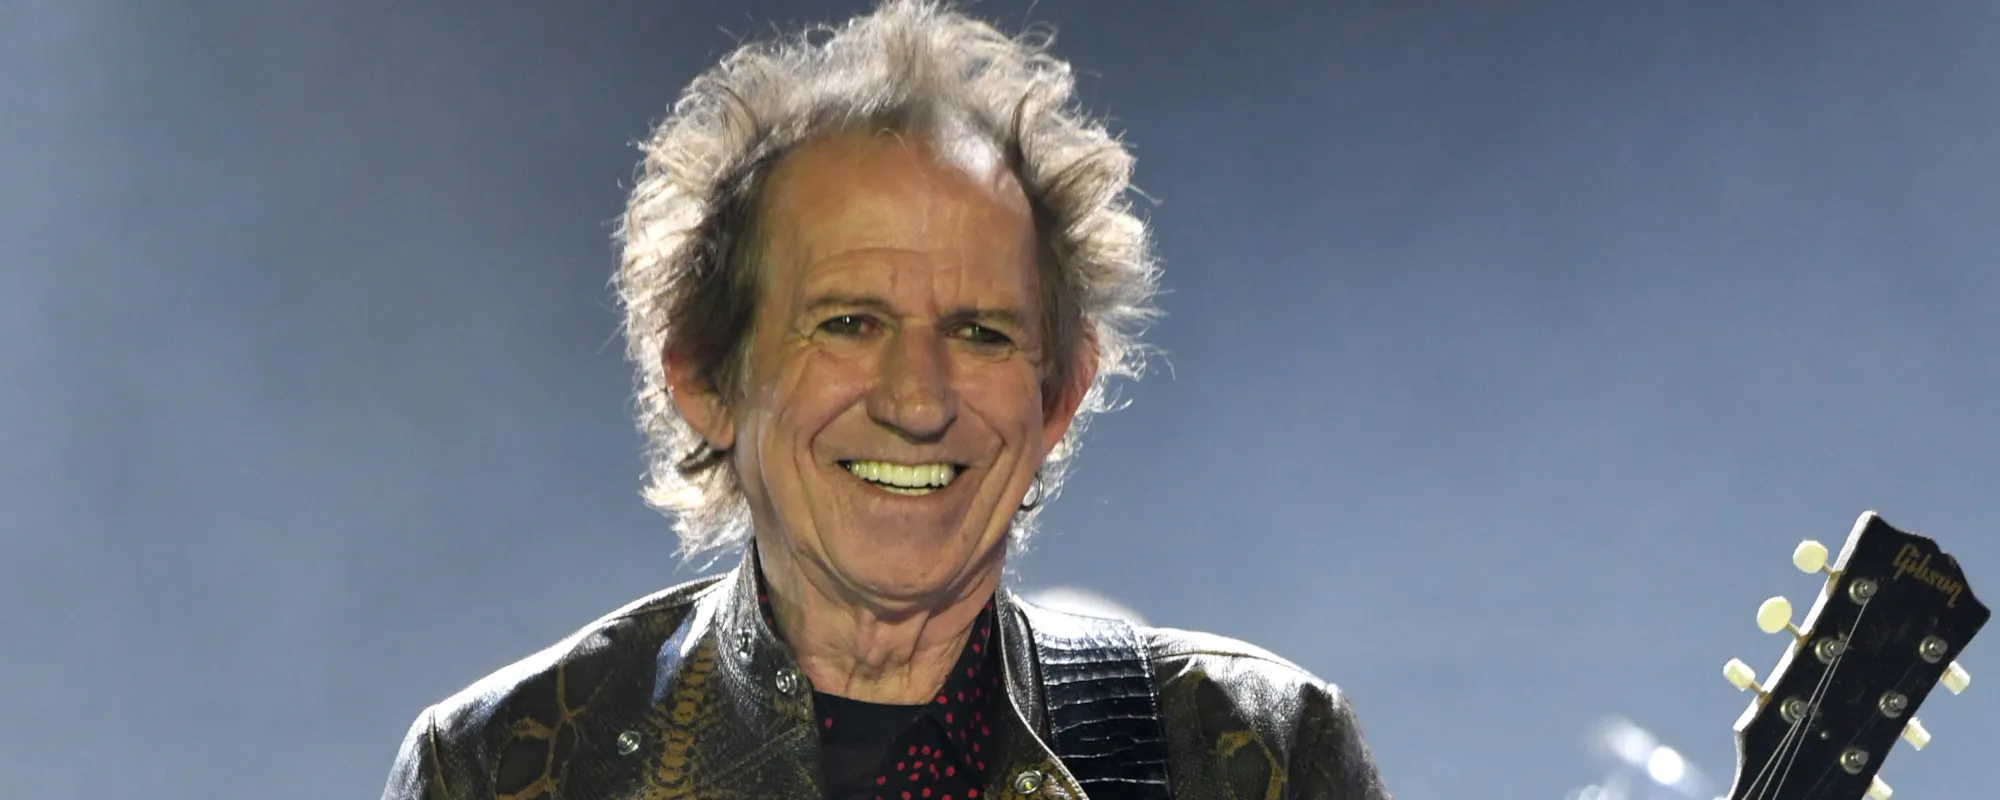 Keith Richards to Re-Release Second Solo LP ‘Main Offender’ Along with 1992 Live Set